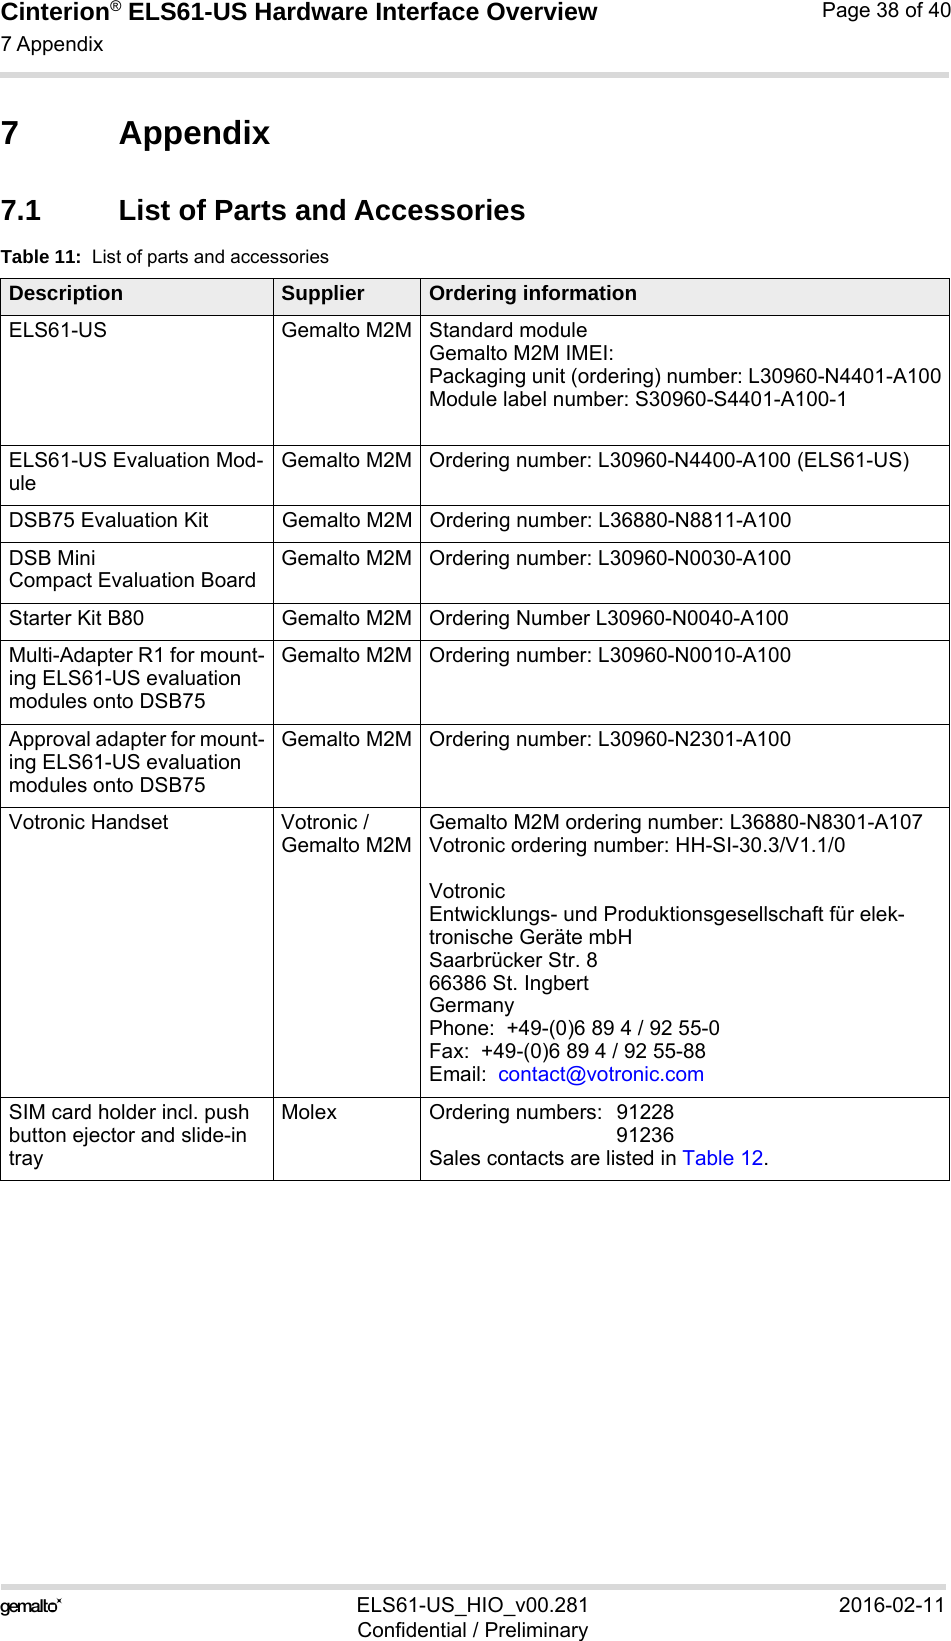 Cinterion® ELS61-US Hardware Interface Overview7 Appendix39ELS61-US_HIO_v00.281 2016-02-11Confidential / PreliminaryPage 38 of 407 Appendix7.1 List of Parts and AccessoriesTable 11:  List of parts and accessoriesDescription Supplier Ordering informationELS61-US Gemalto M2M Standard module Gemalto M2M IMEI:Packaging unit (ordering) number: L30960-N4401-A100Module label number: S30960-S4401-A100-1ELS61-US Evaluation Mod-uleGemalto M2M Ordering number: L30960-N4400-A100 (ELS61-US)DSB75 Evaluation Kit Gemalto M2M Ordering number: L36880-N8811-A100DSB MiniCompact Evaluation BoardGemalto M2M Ordering number: L30960-N0030-A100Starter Kit B80 Gemalto M2M Ordering Number L30960-N0040-A100Multi-Adapter R1 for mount-ing ELS61-US evaluation modules onto DSB75Gemalto M2M Ordering number: L30960-N0010-A100Approval adapter for mount-ing ELS61-US evaluation modules onto DSB75Gemalto M2M Ordering number: L30960-N2301-A100Votronic Handset Votronic / Gemalto M2MGemalto M2M ordering number: L36880-N8301-A107Votronic ordering number: HH-SI-30.3/V1.1/0Votronic Entwicklungs- und Produktionsgesellschaft für elek-tronische Geräte mbHSaarbrücker Str. 866386 St. IngbertGermanyPhone:  +49-(0)6 89 4 / 92 55-0Fax:  +49-(0)6 89 4 / 92 55-88Email:  contact@votronic.comSIM card holder incl. push button ejector and slide-in trayMolex Ordering numbers:  91228 91236Sales contacts are listed in Table 12.